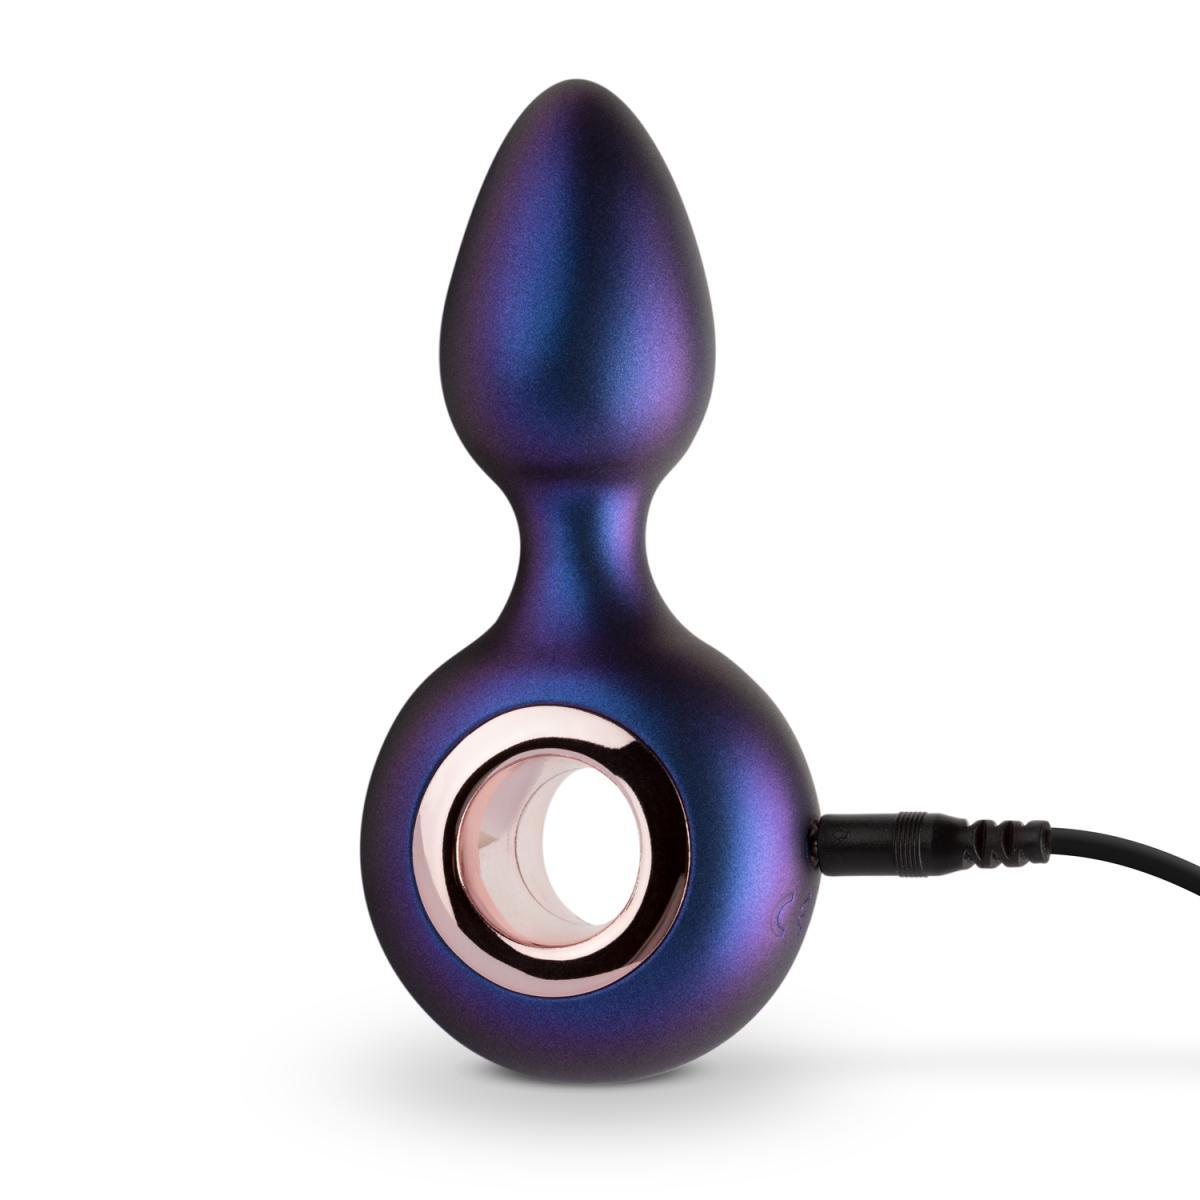 Hueman Deep Space Vibrating - Buy At Luxury Toy X - Free 3-Day Shipping